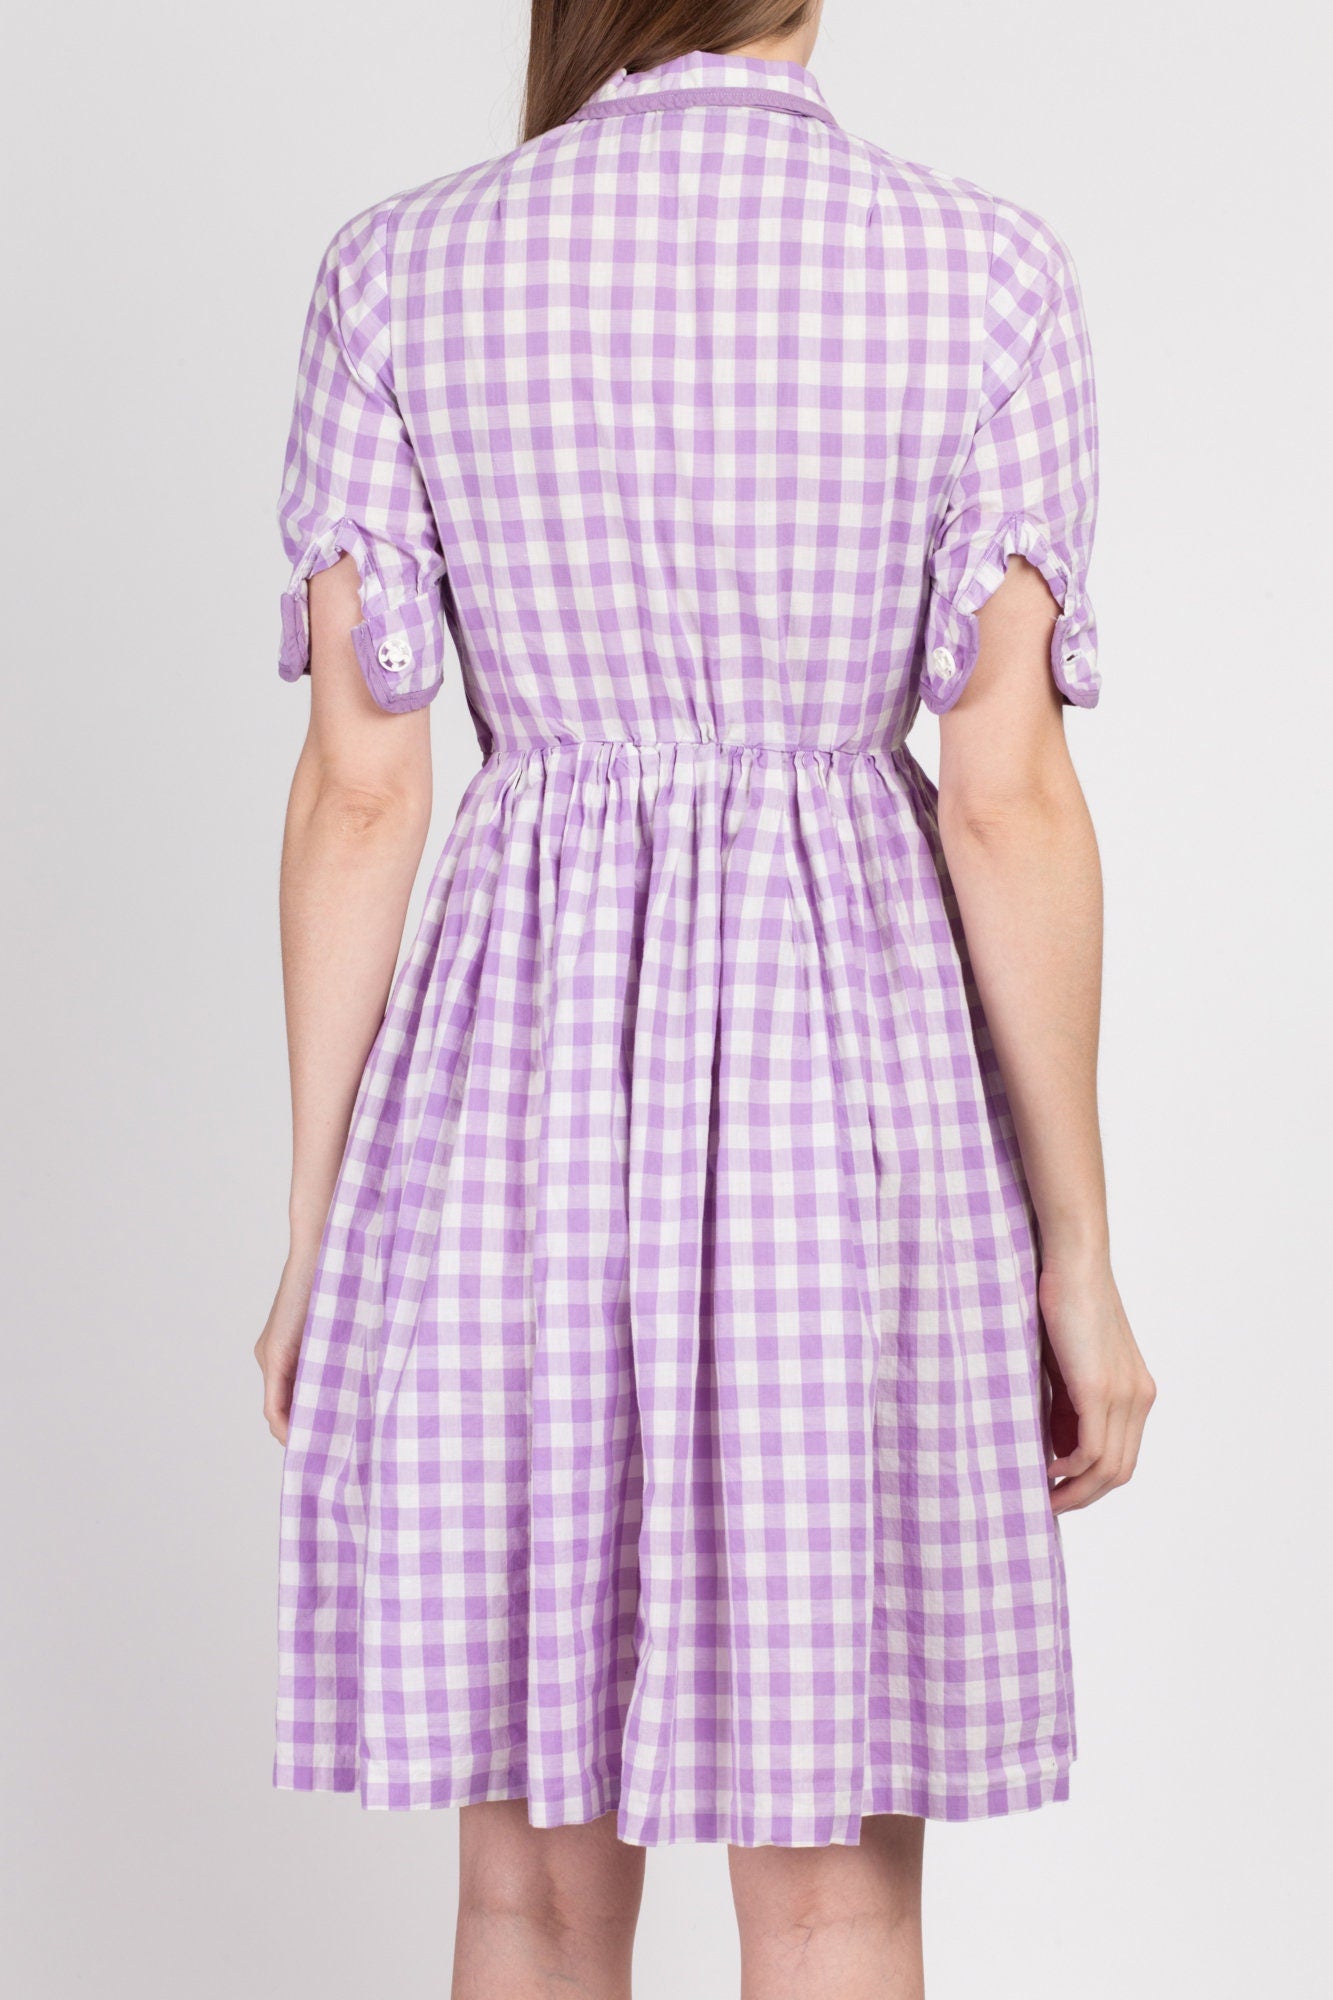 Vintage 1940s Purple Gingham Checkered Day Dress - Petite XS 